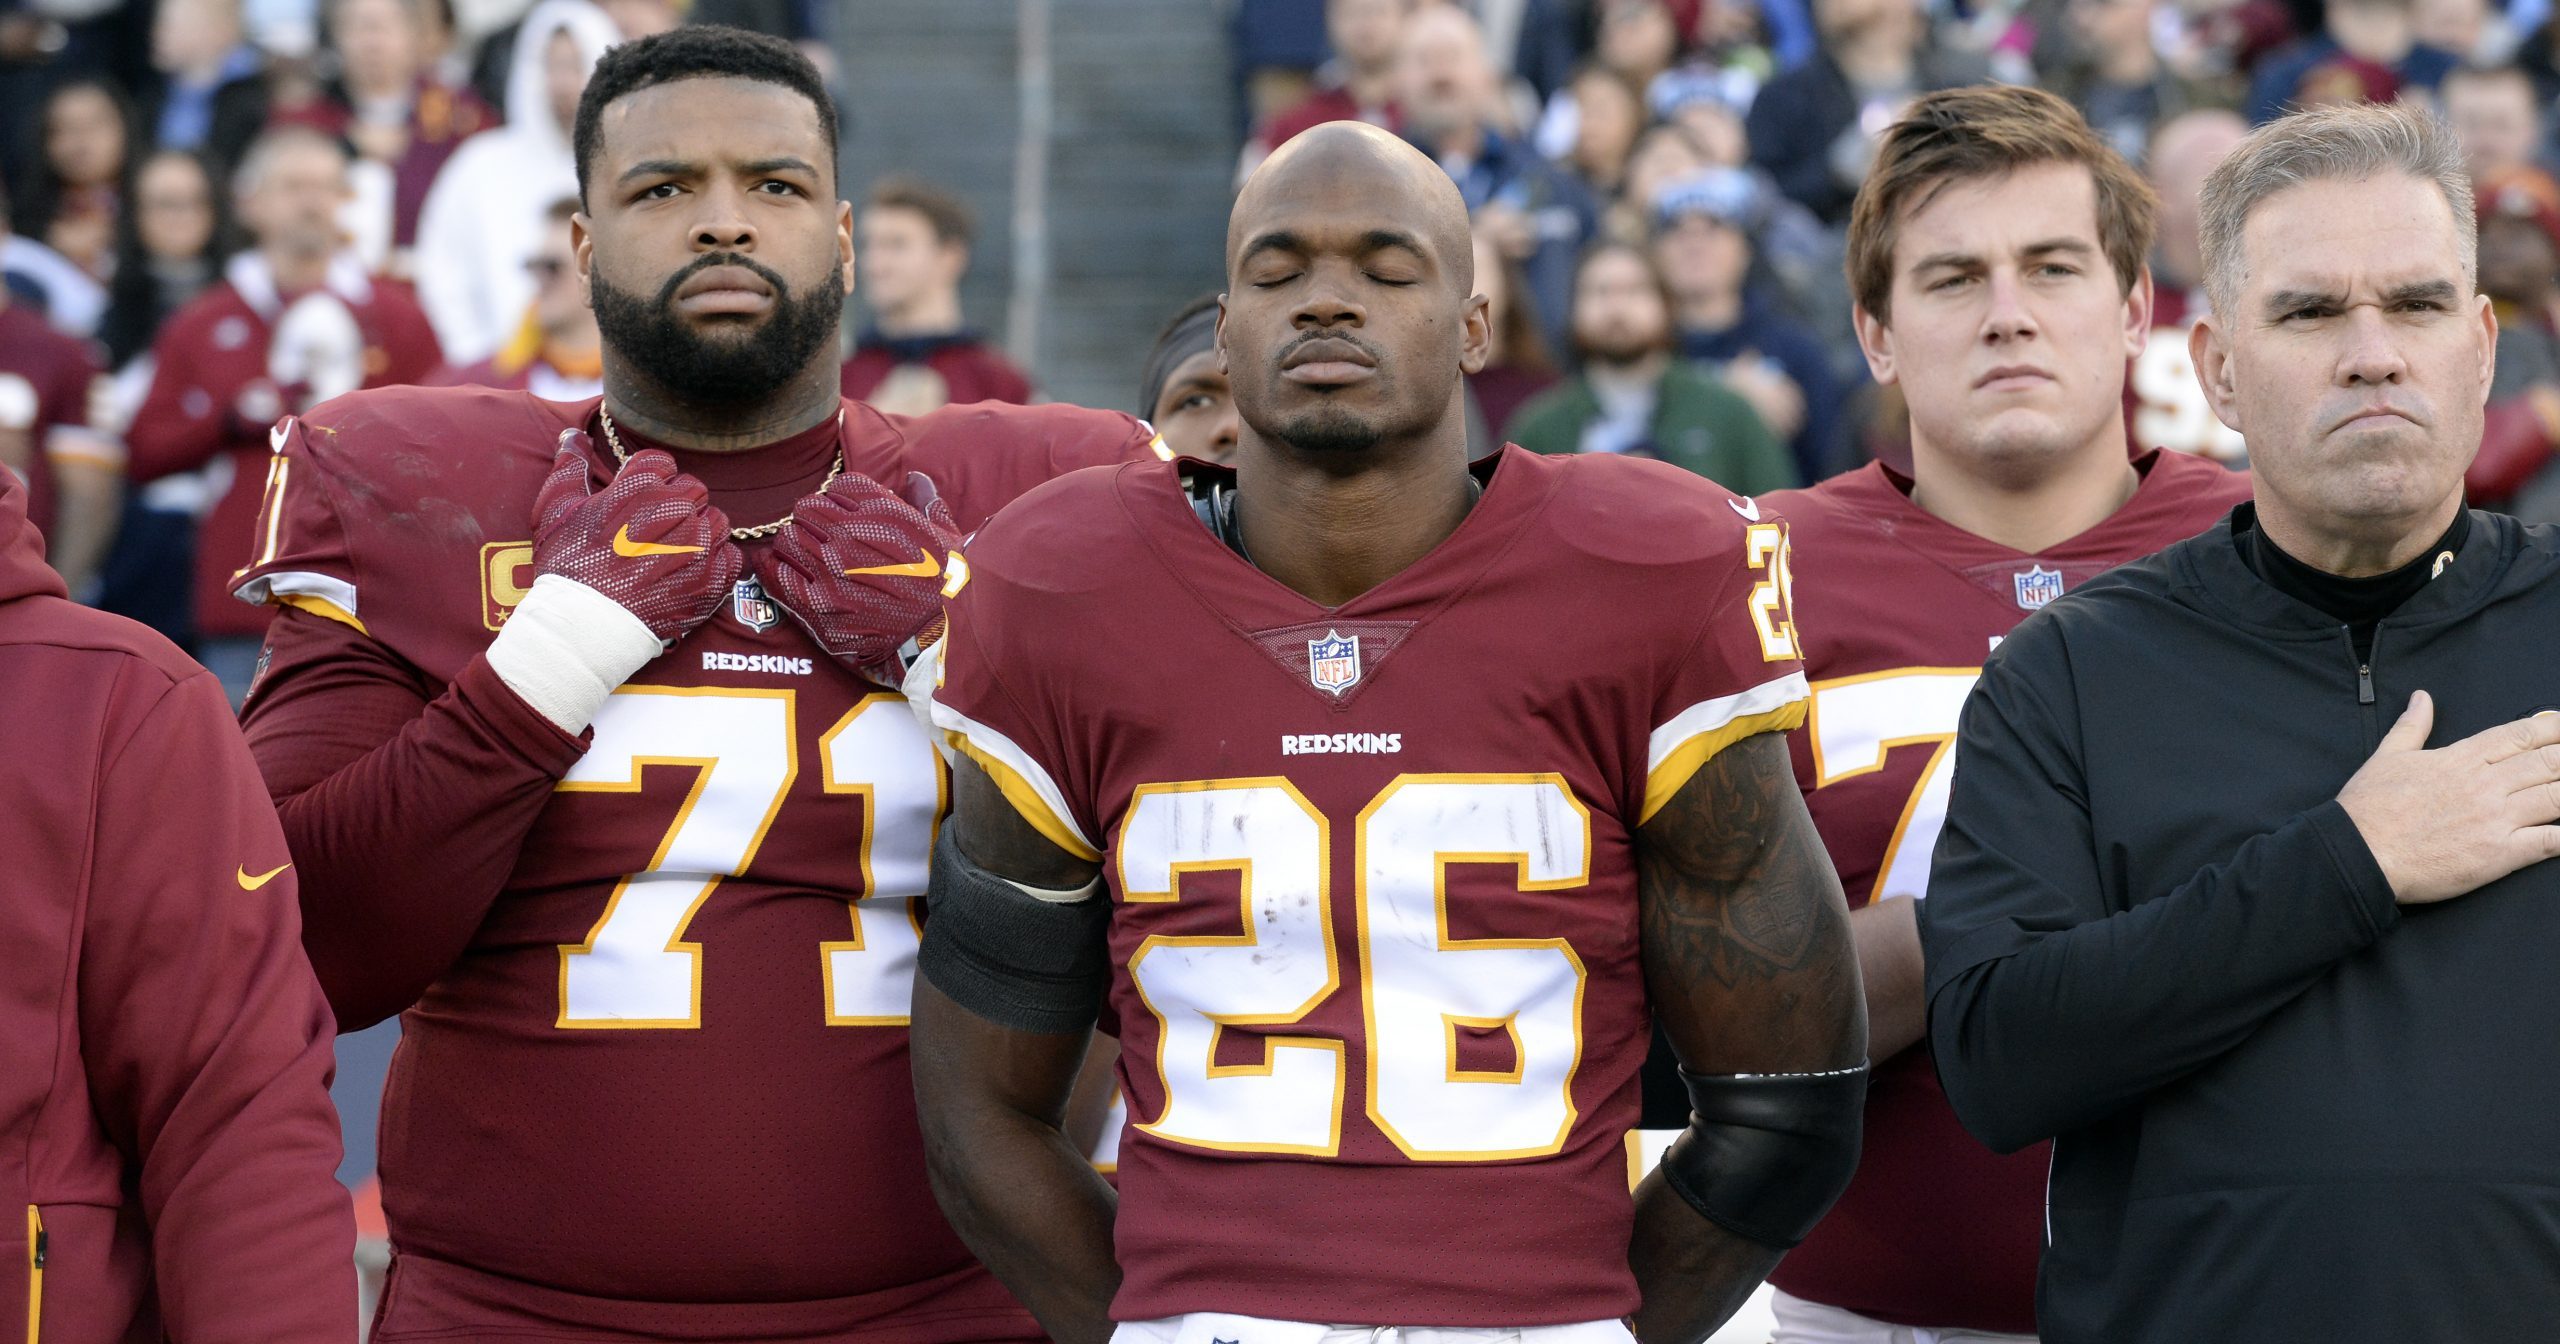 In this Dec. 22, 2018, file photo, Washington Redskins running back Adrian Peterson (26) stands for the national anthem before an NFL football game against the Tennessee Titans in Nashville.